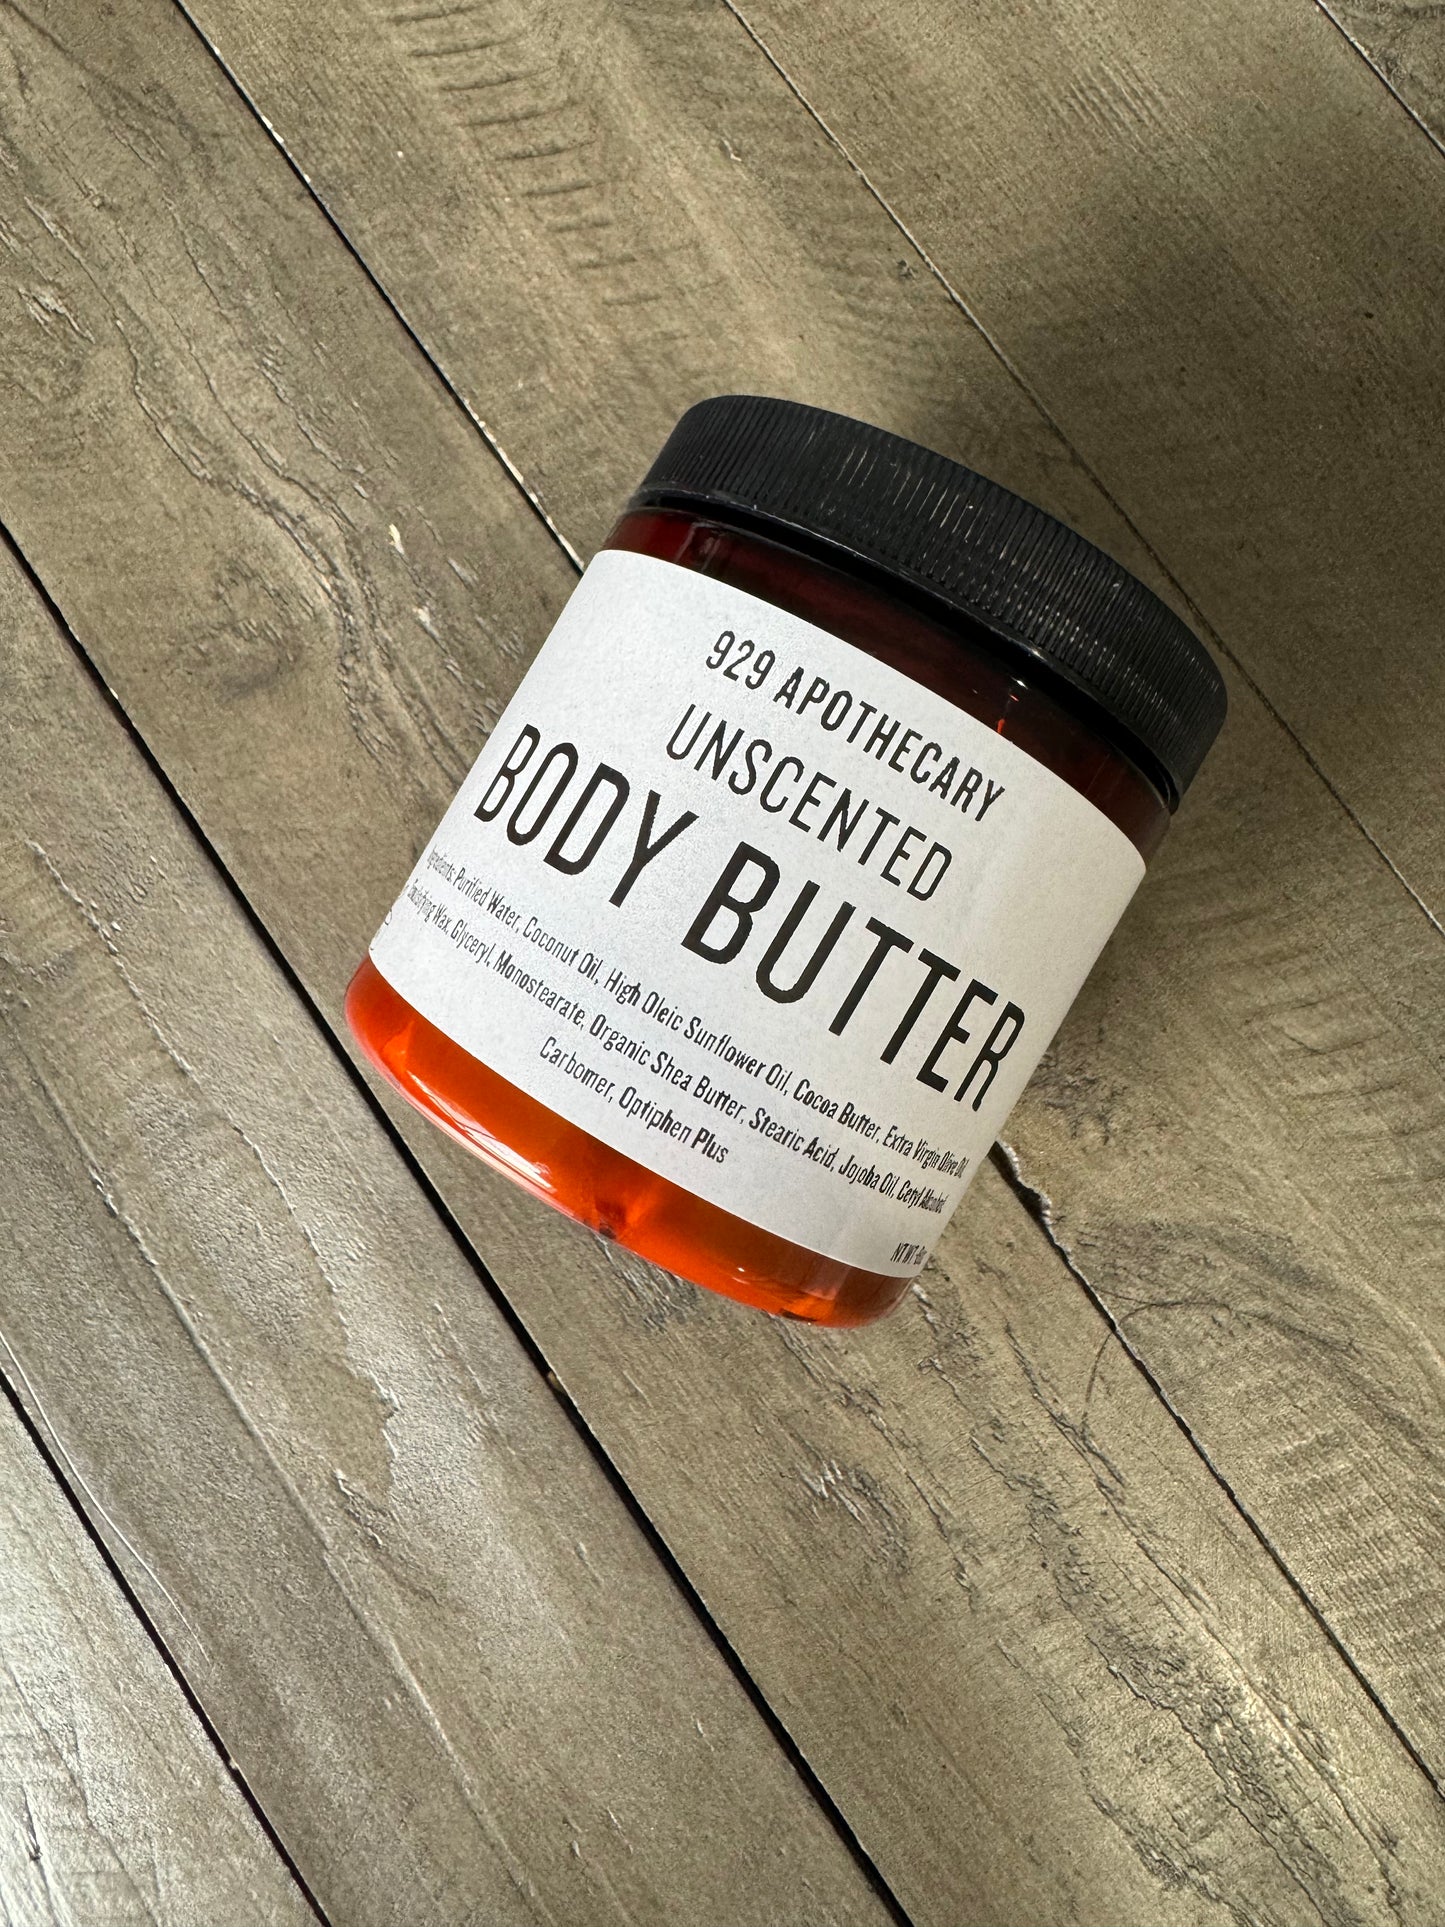 Ultra-Rich Nourishing Body Butter | Deep Hydration for Silky Smooth Skin